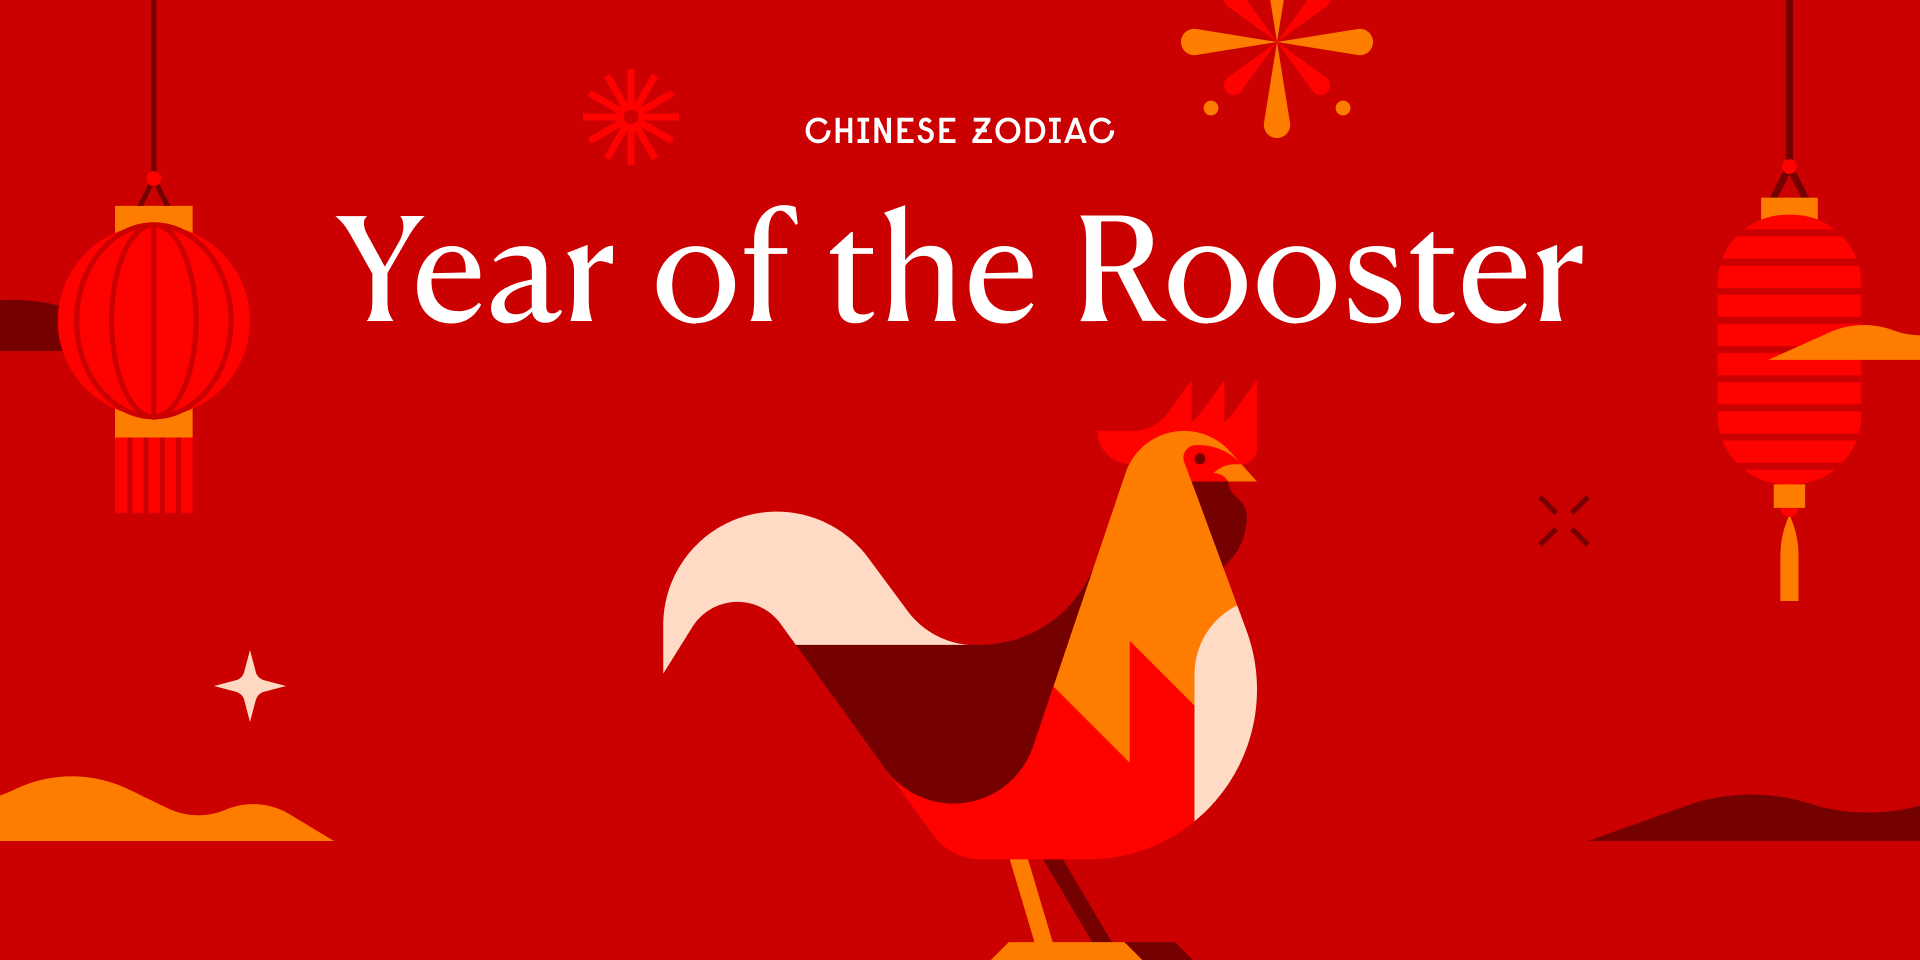 converse year of the rooster horoscope